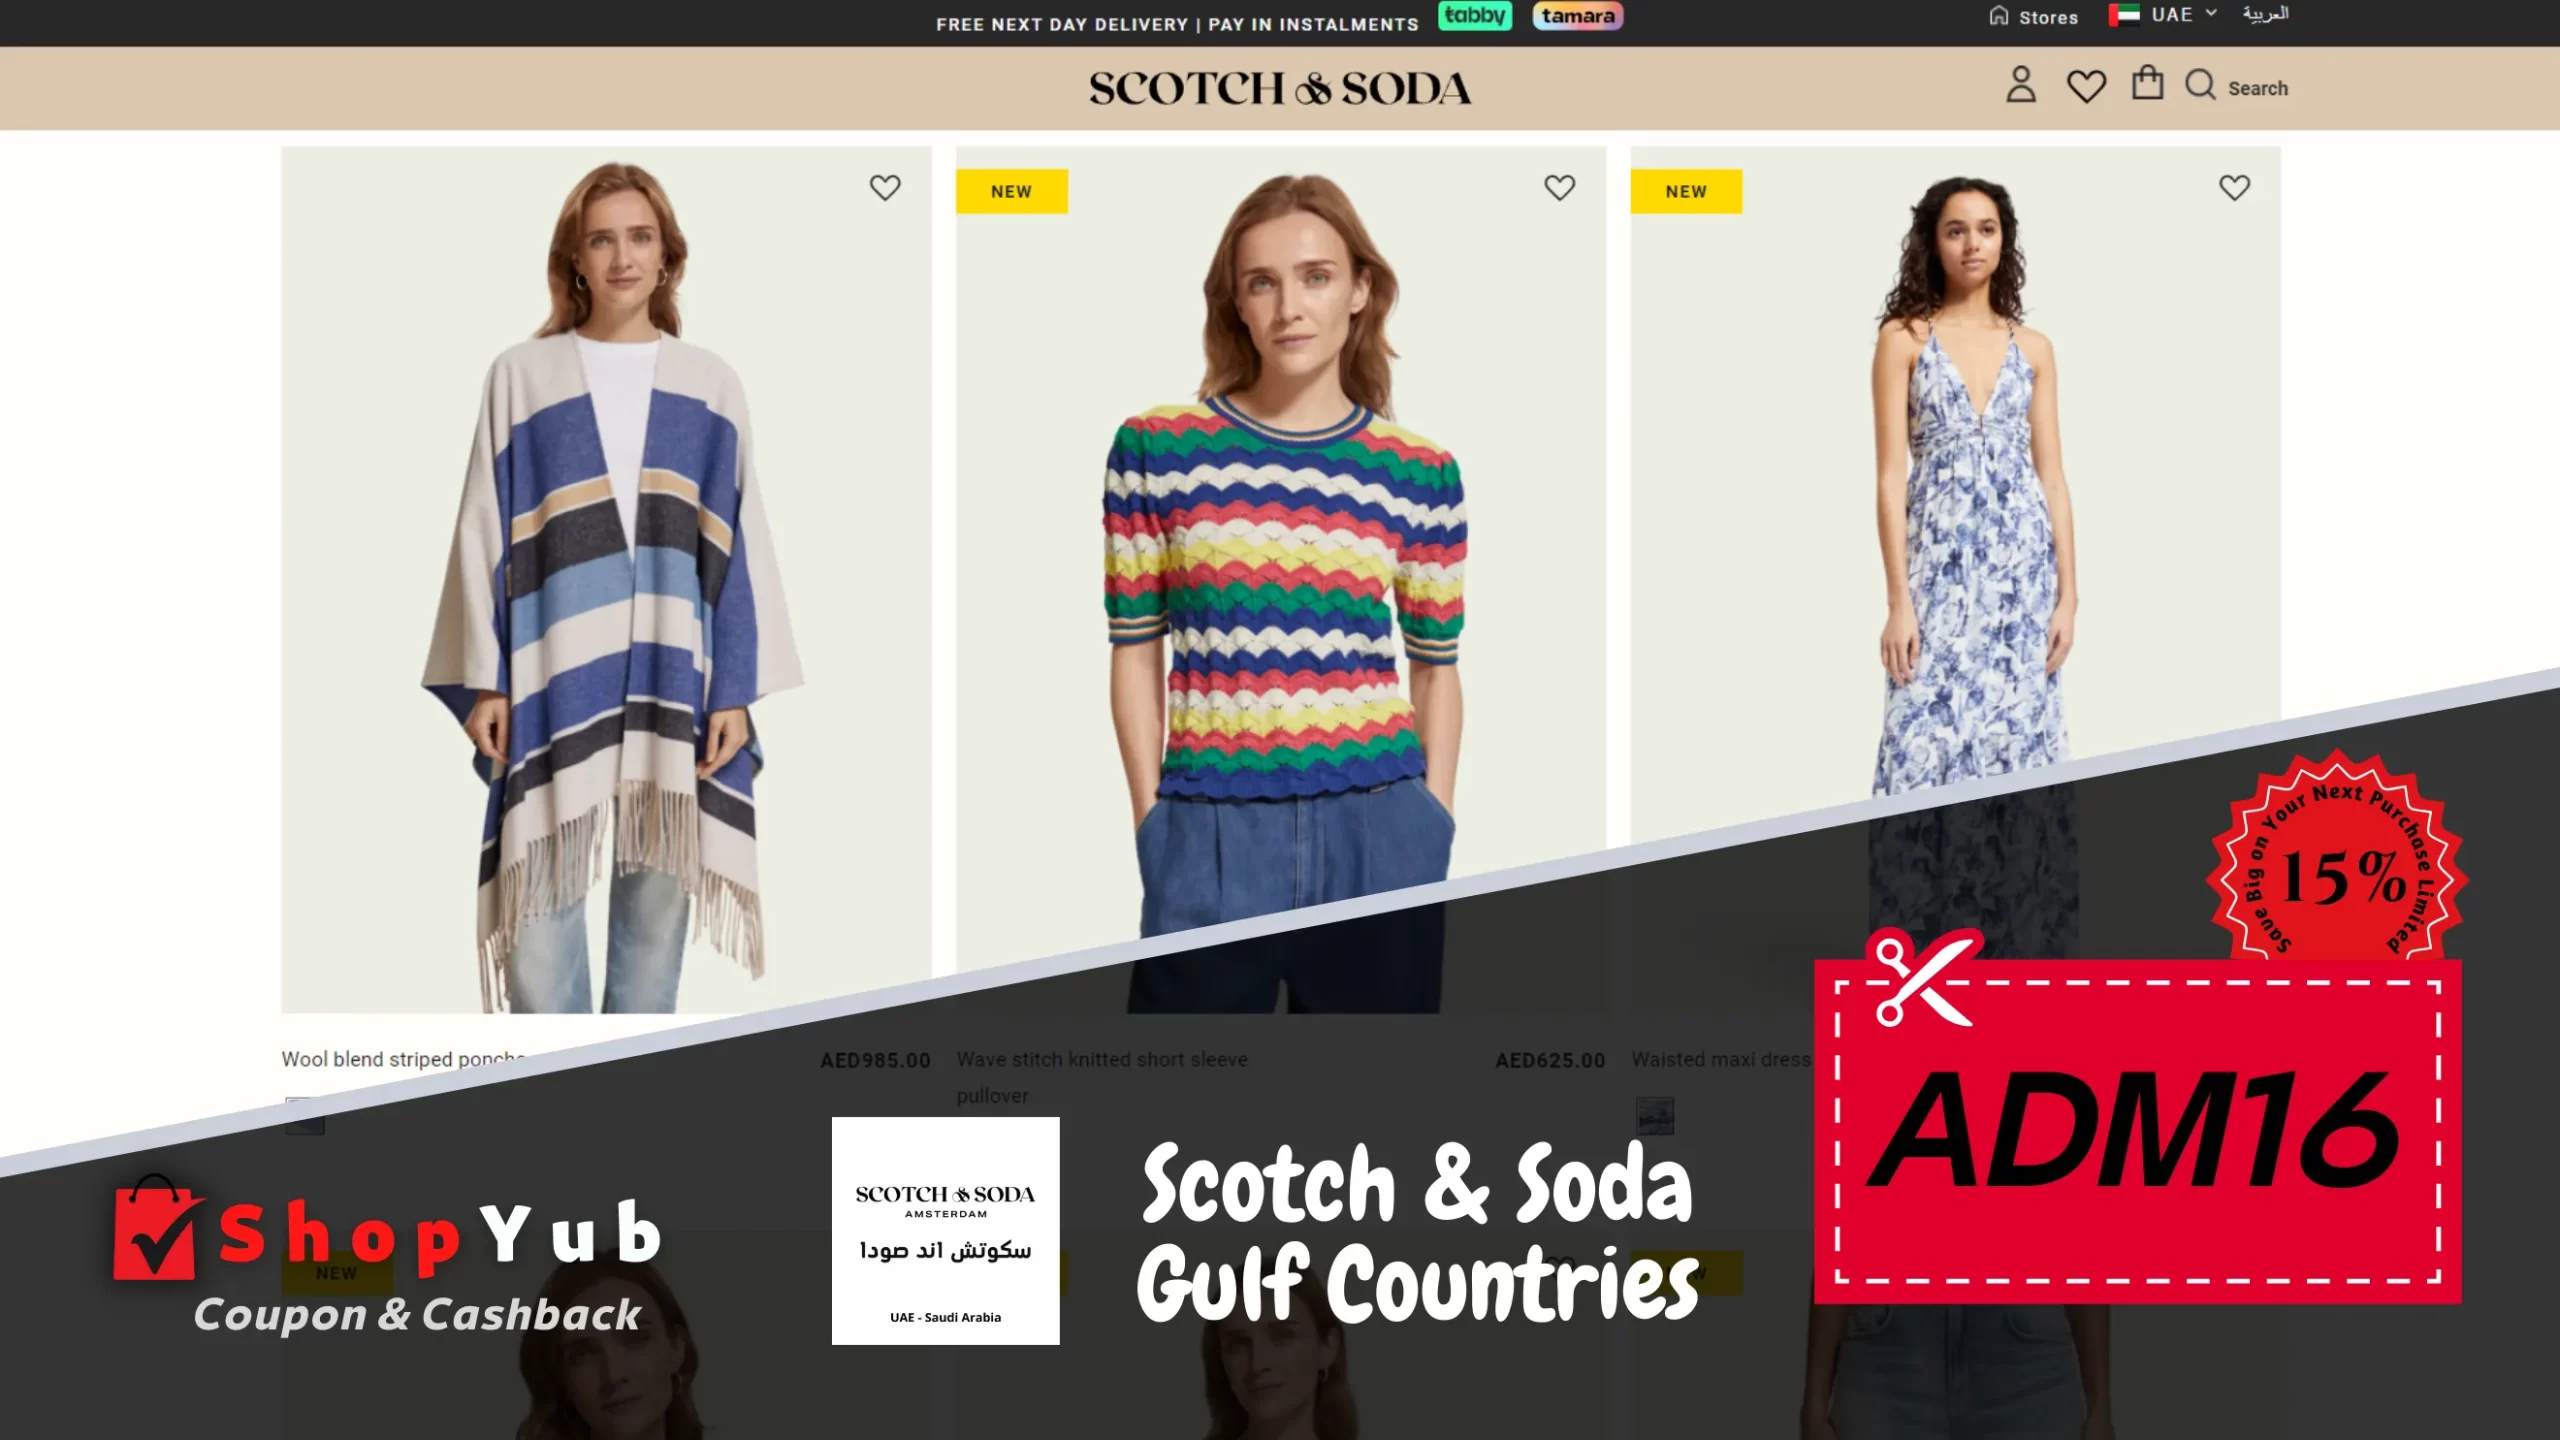 Use Scotch & Soda Promo Code: ADM16 ✓ Verified Coupons for UAE, KSA 📍 Get 15% Off Discount Codes Fashion online ▶ March 2024.